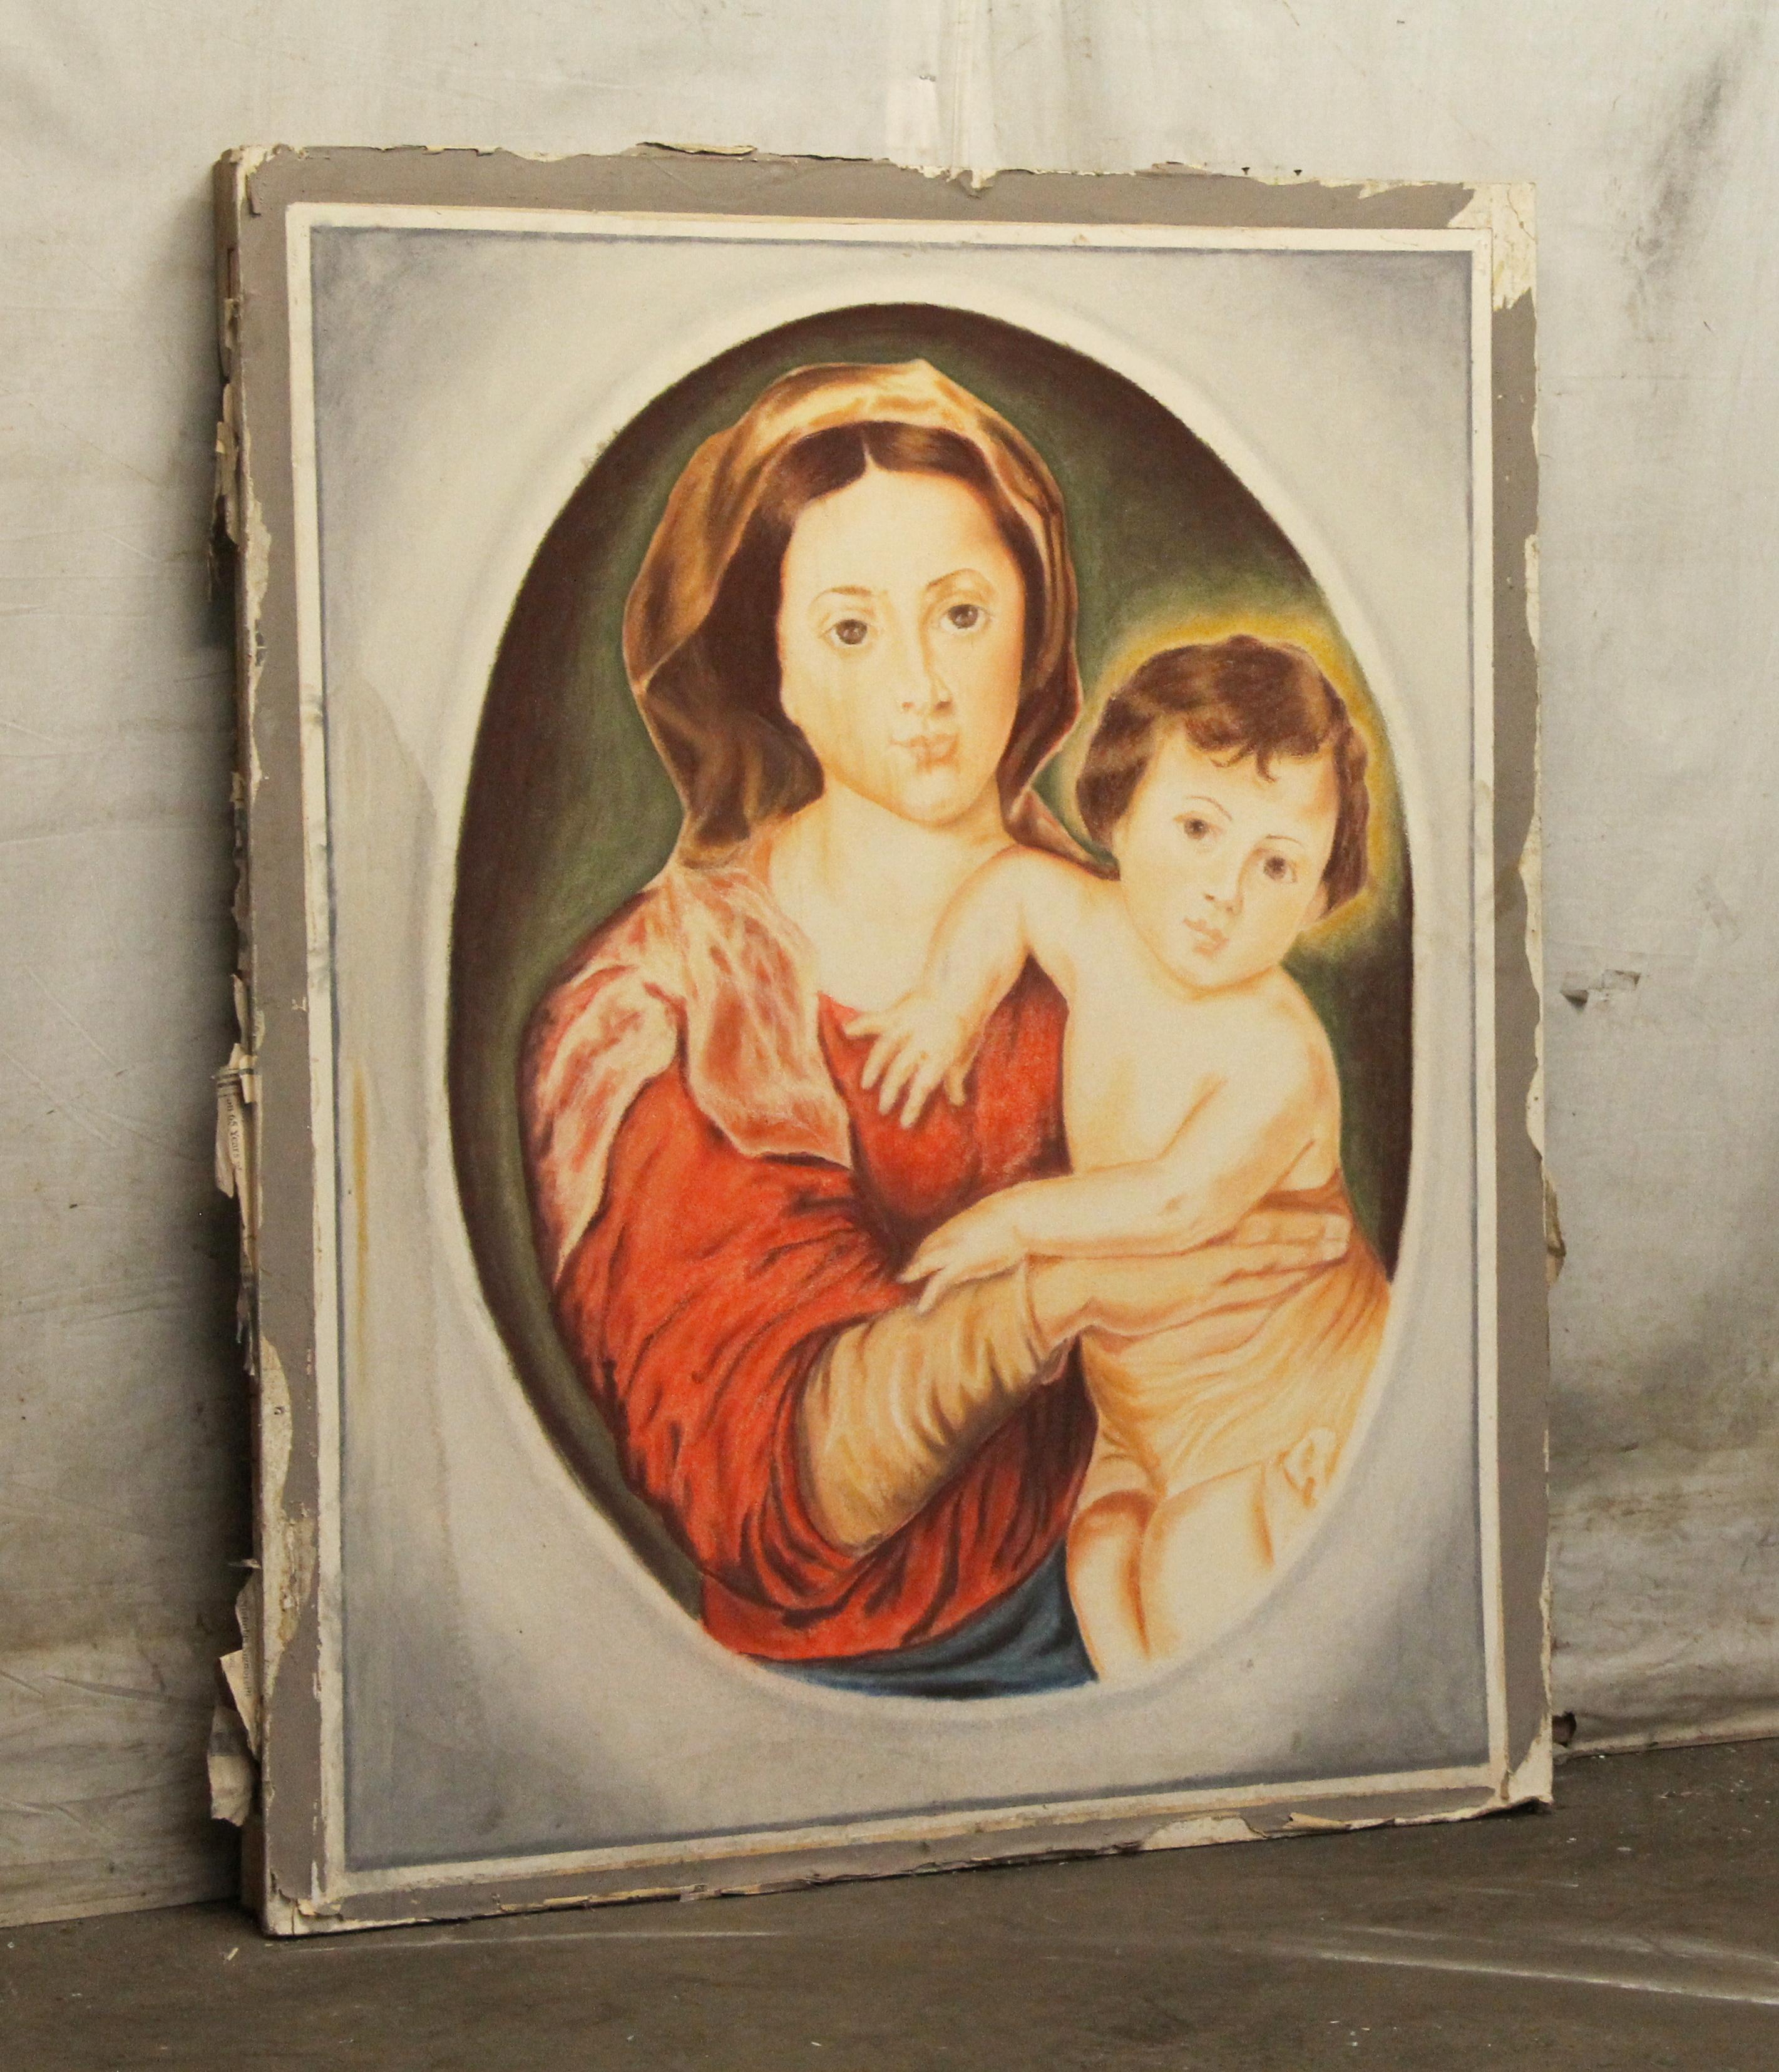 Large painting of the famous Madonna and child done on sheet rock. The back is framed with wood. This was salvaged from Rose Hill, the Tudor Mansion of American impresario Billy rose which had a chapel constructed onsite in 1954. Please note, this